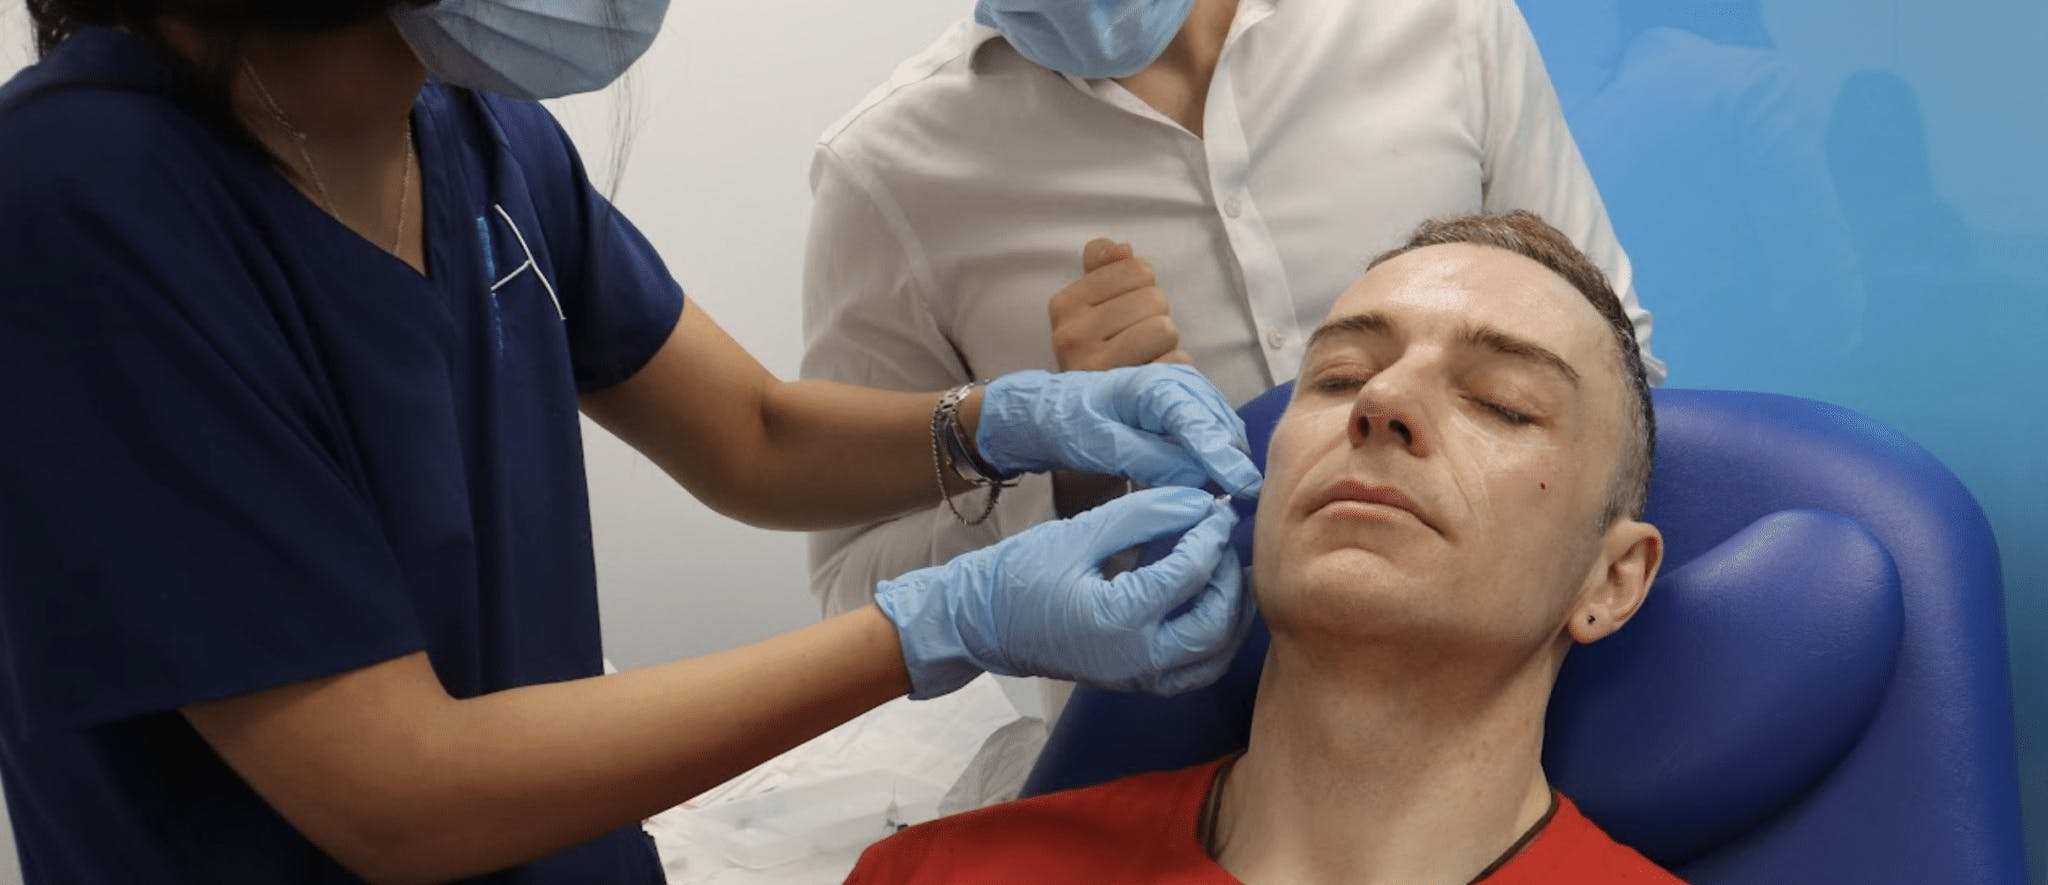 Using a cannula to inject dermal fillers